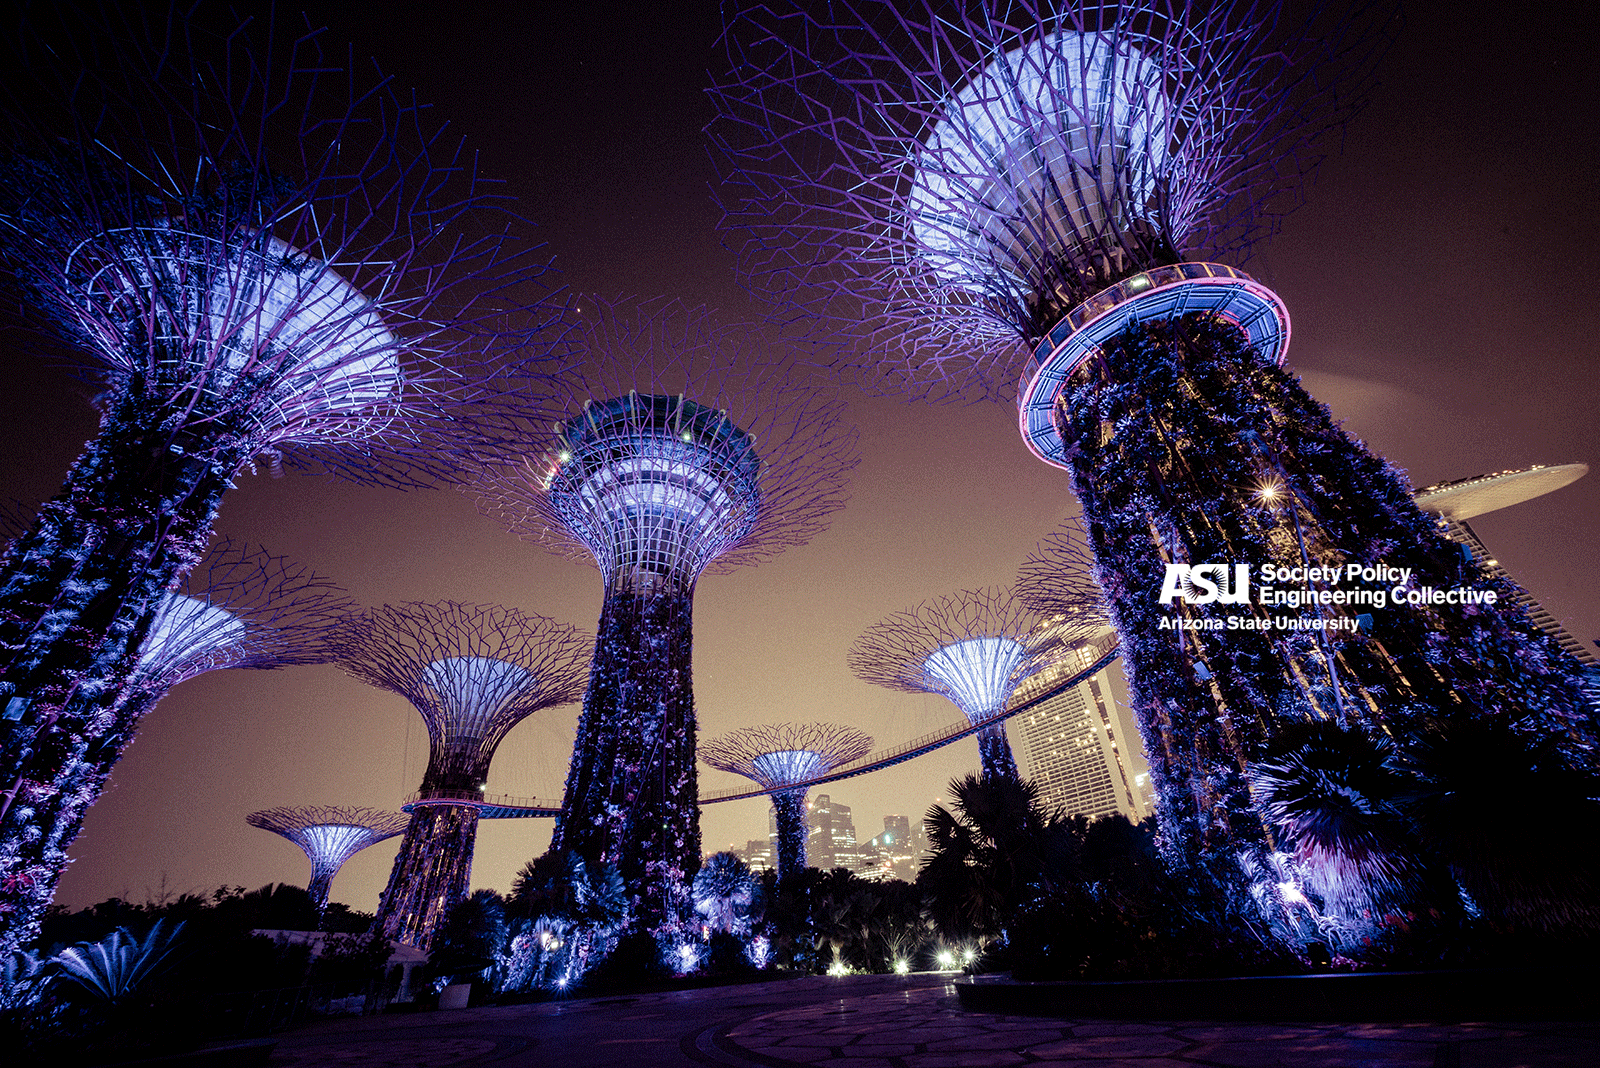 humanmade tree-like structures in blue-purple lighting at night